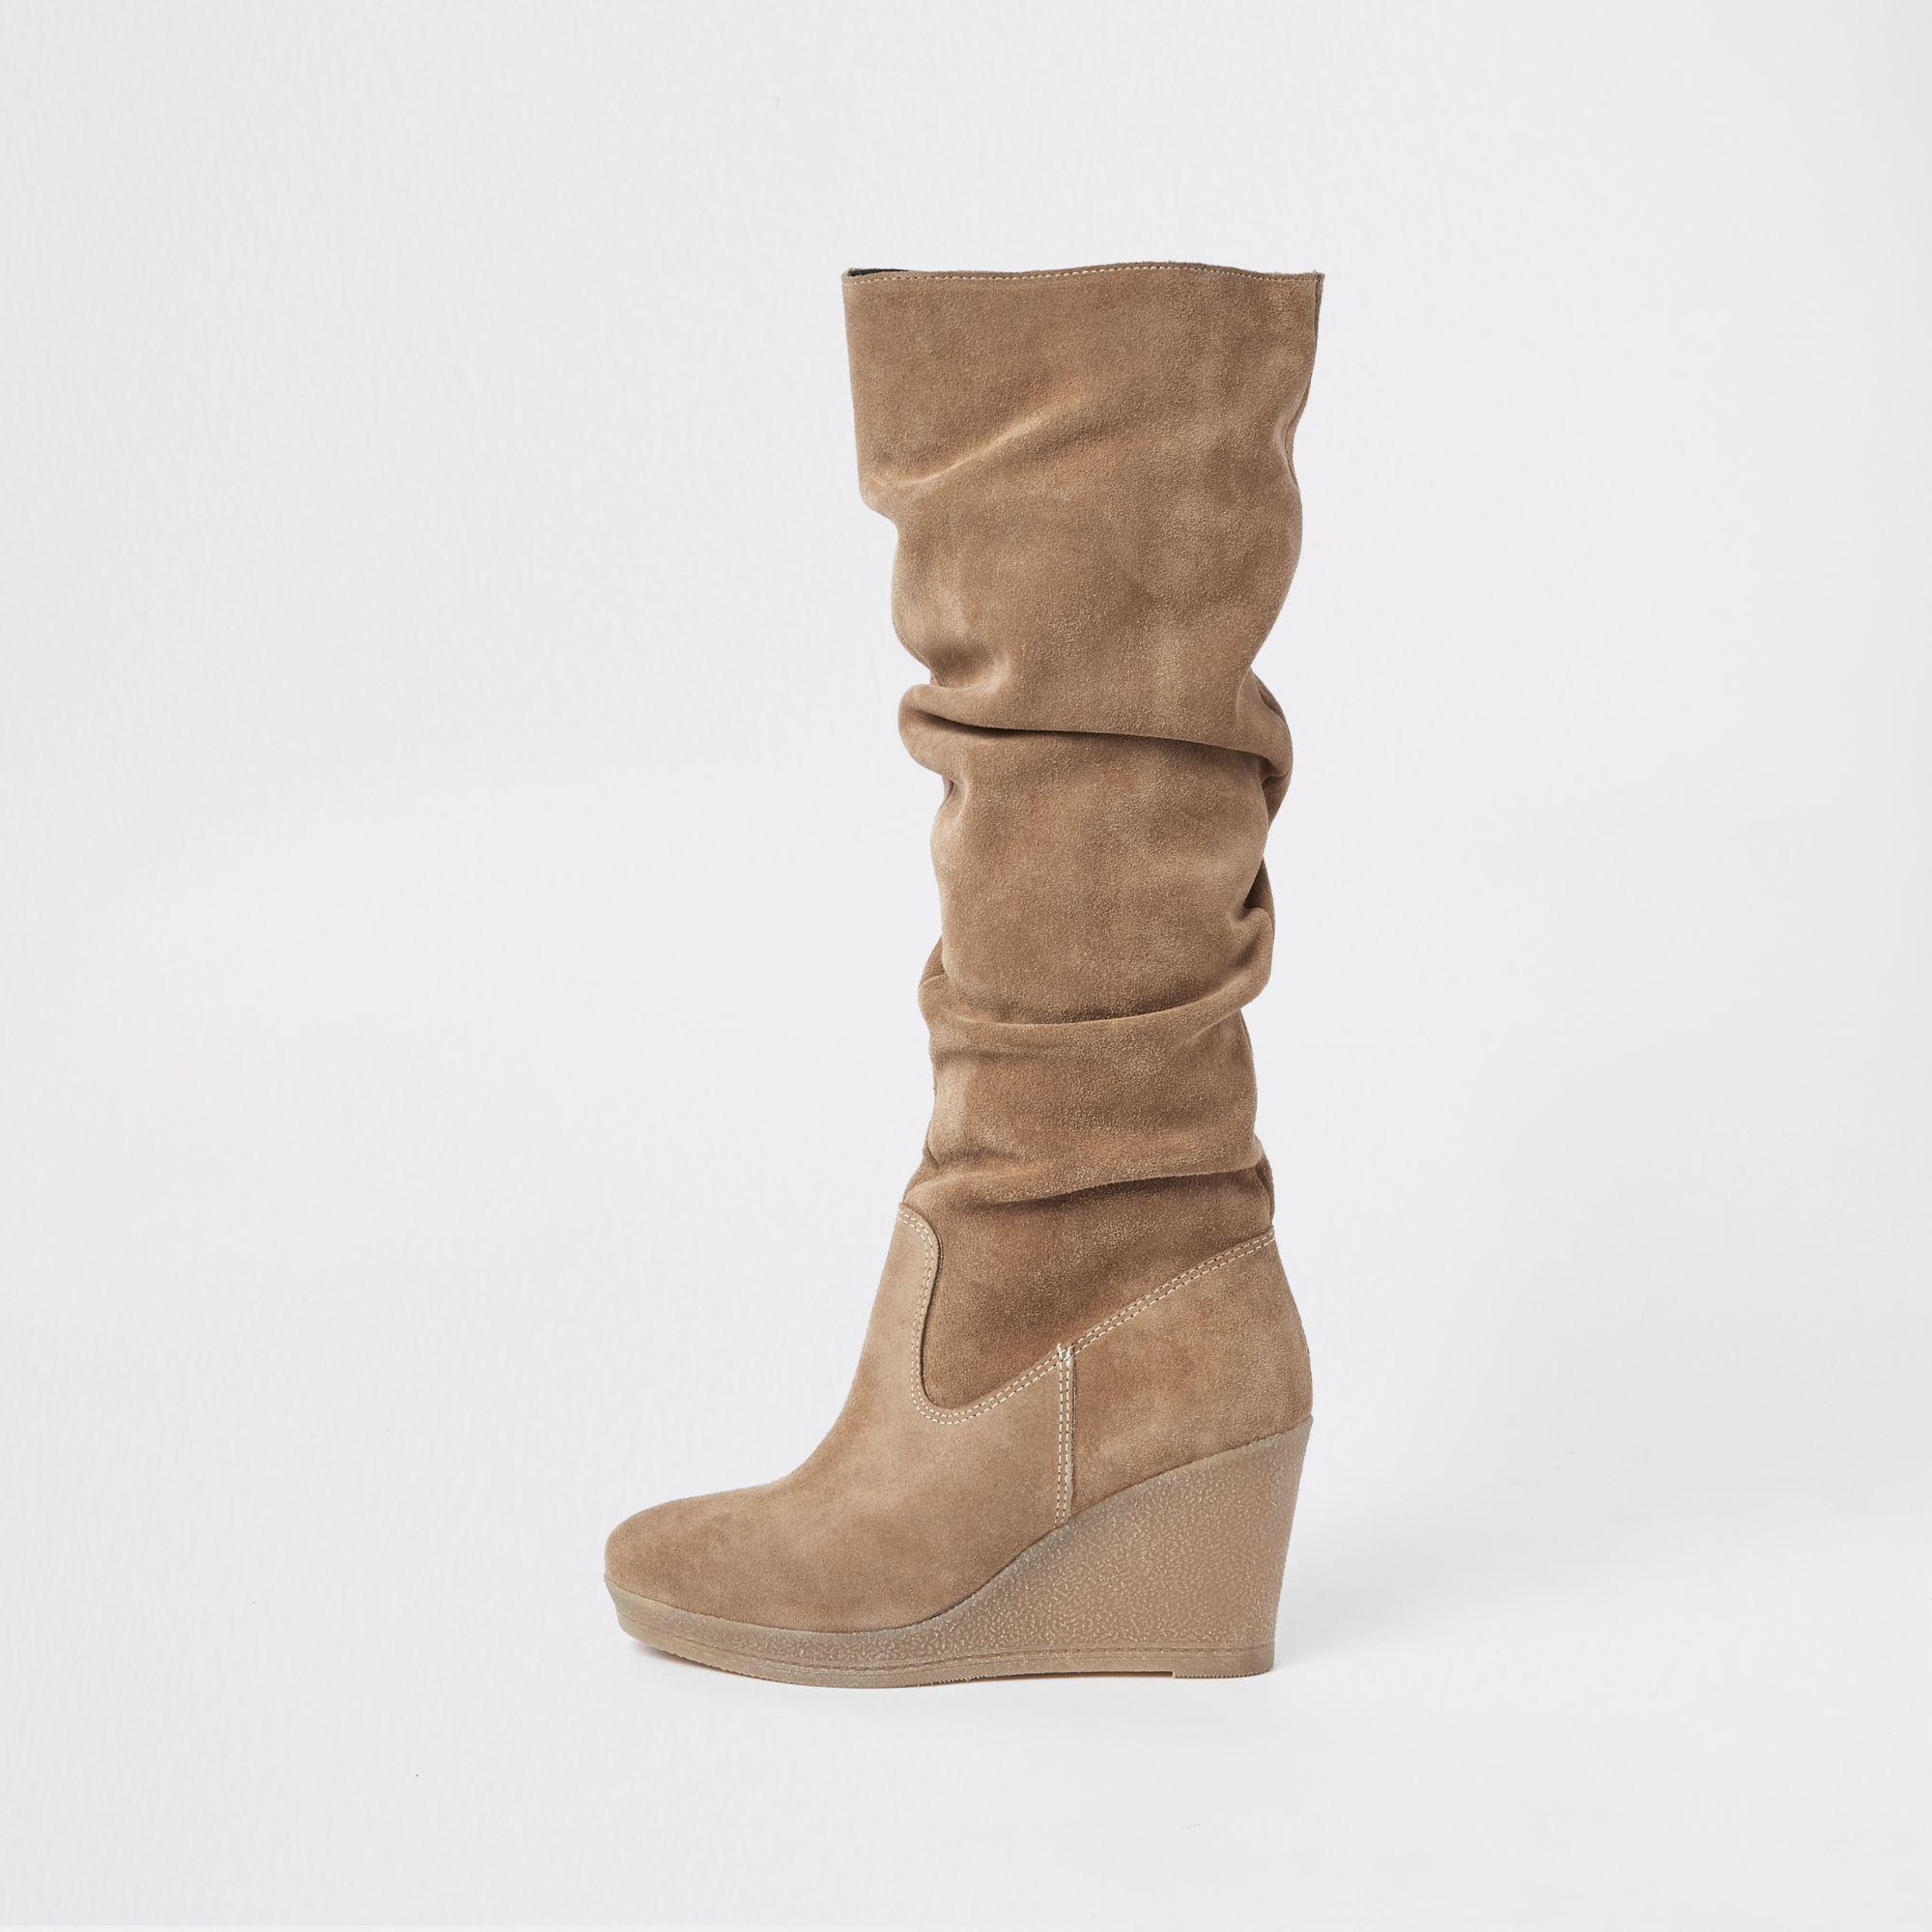 River Island Suede Knee High Slouch Wedge Boots in Natural | Lyst